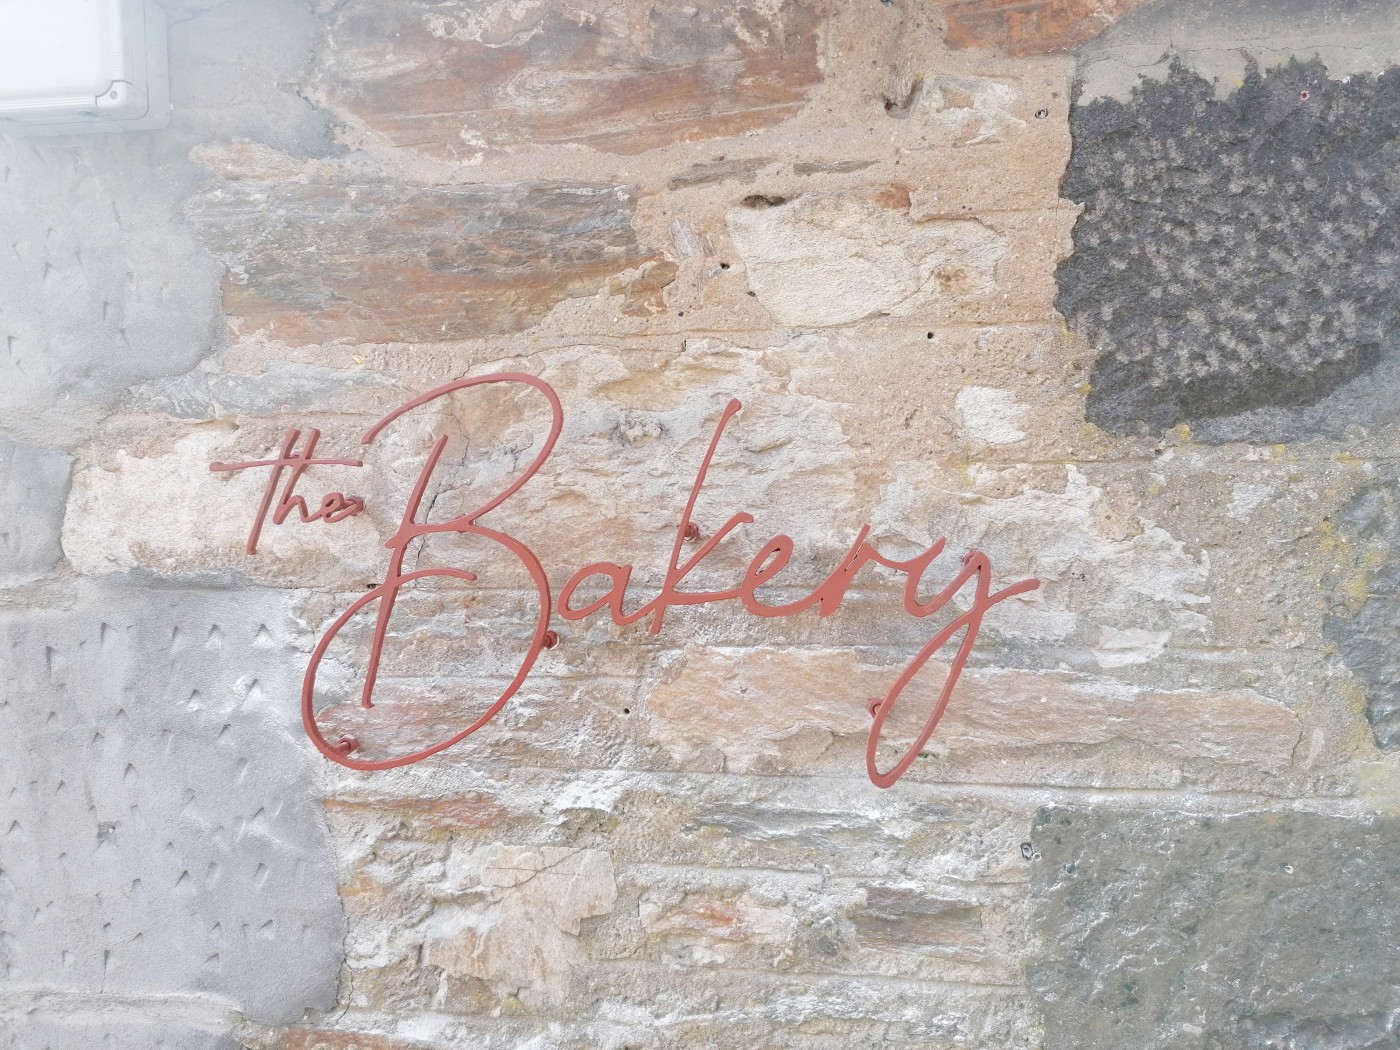 The Bakery Pitlochry eatery